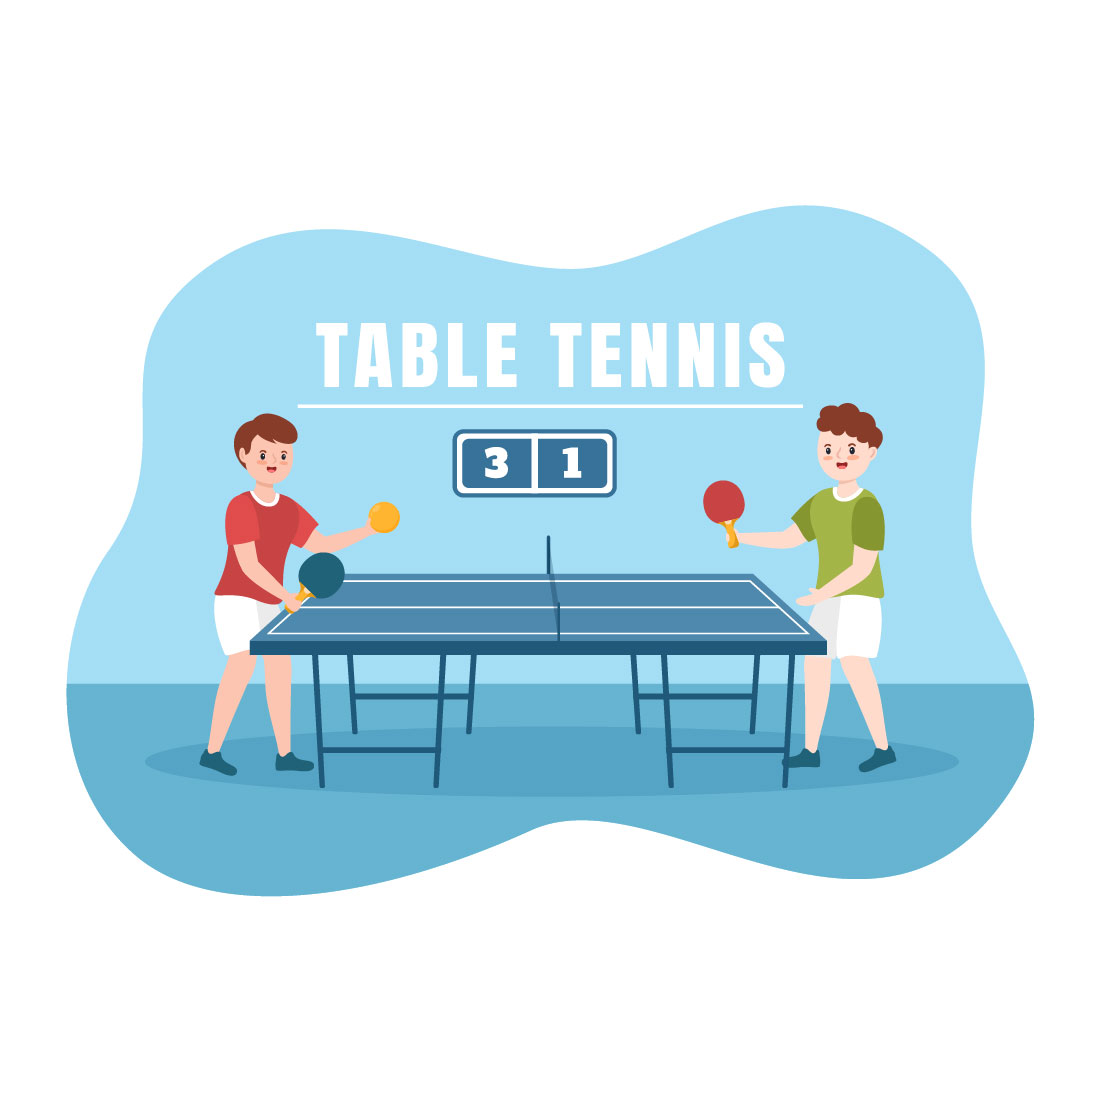 Exquisite cartoon image of guys playing table tennis.